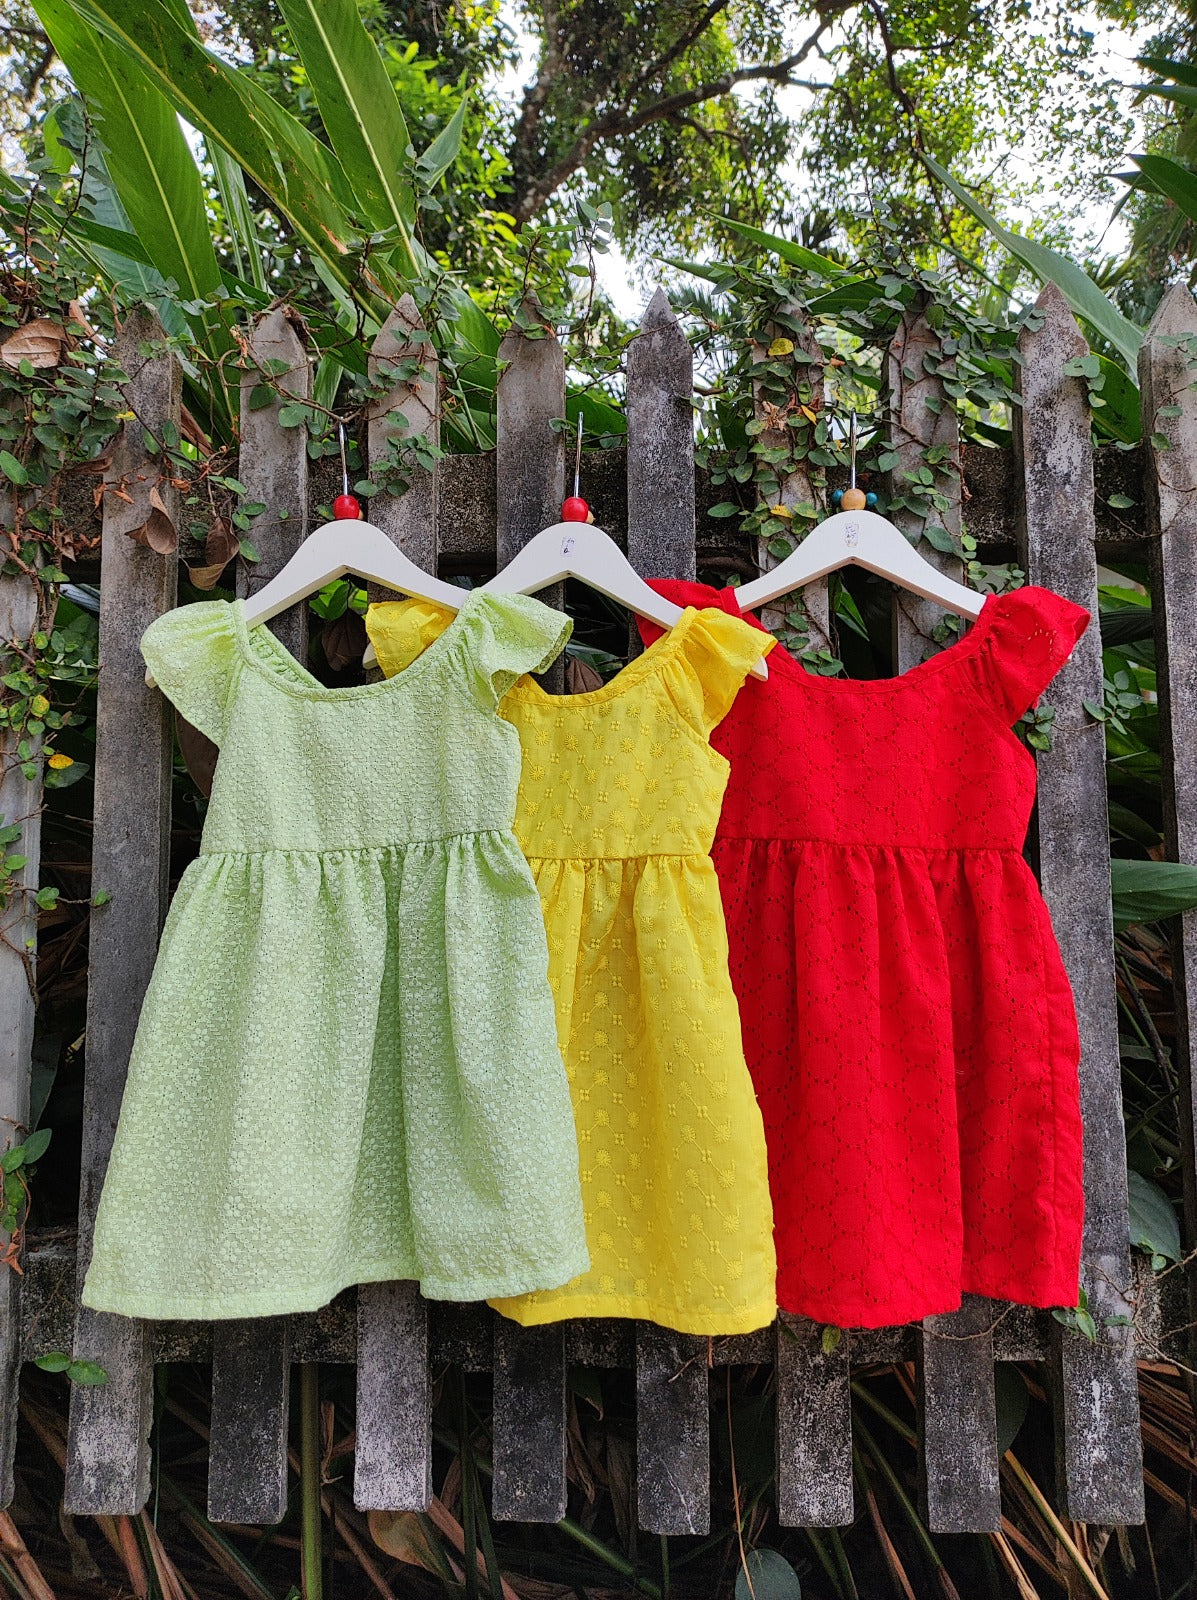 cotton fabric baby frock designs, cotton fabric baby frock designs  Suppliers and Manufacturers at